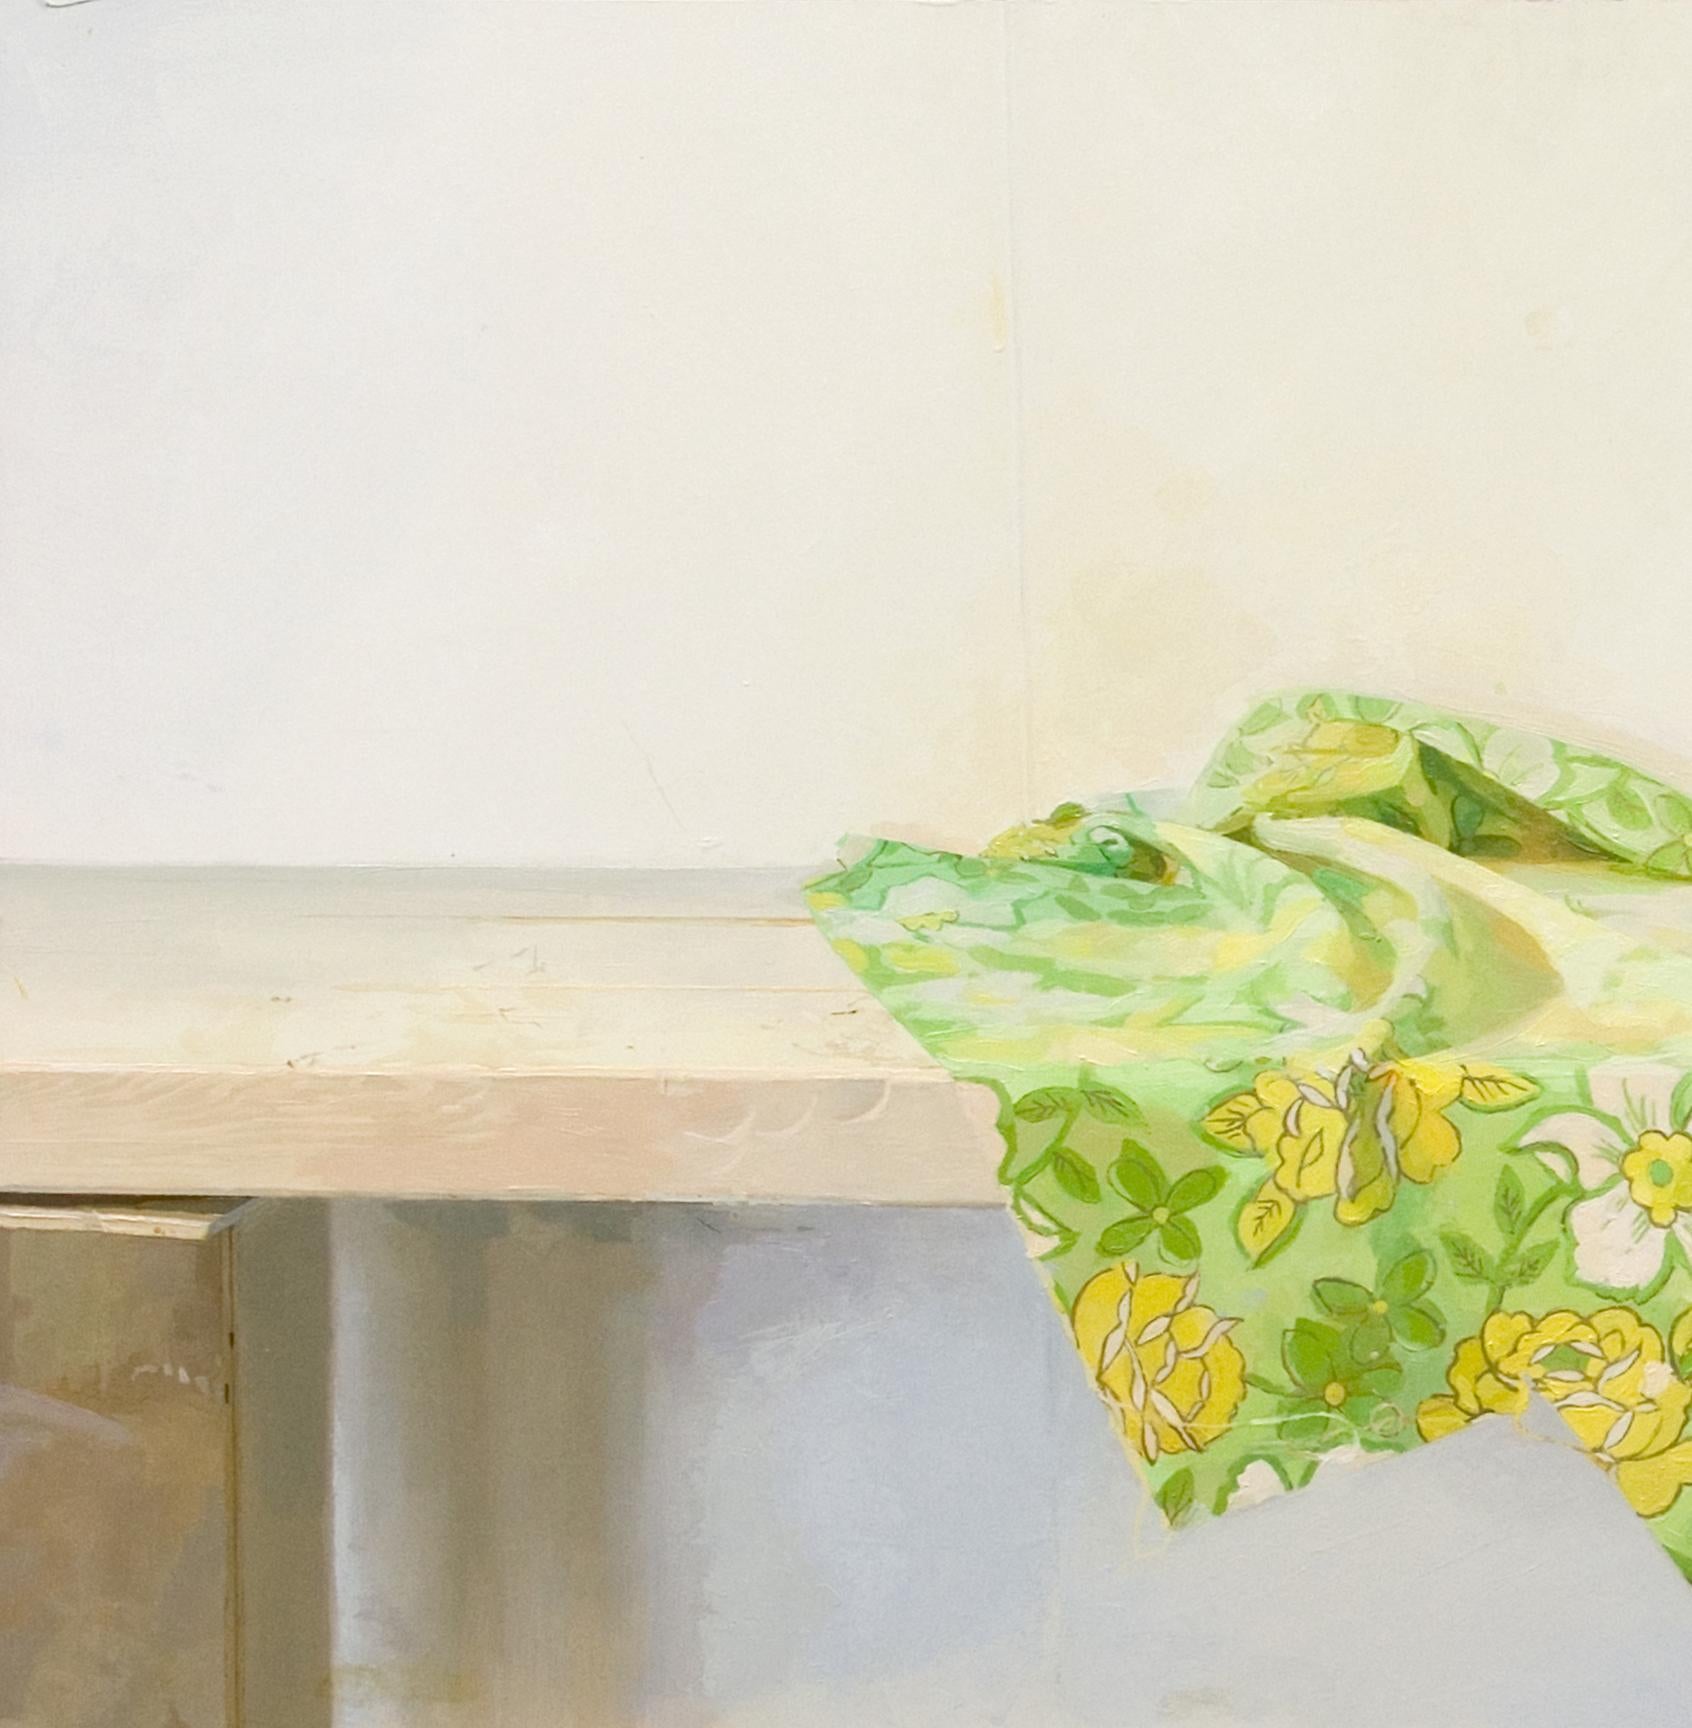 A floral patterned fabric with yellow flowers on light green lays atop a nondescript light wood table. The botanical patterned object is unexpectedly dramatic against a stark white wall. Signed, dated and titled on verso.

Brett Eberhardt’s painted